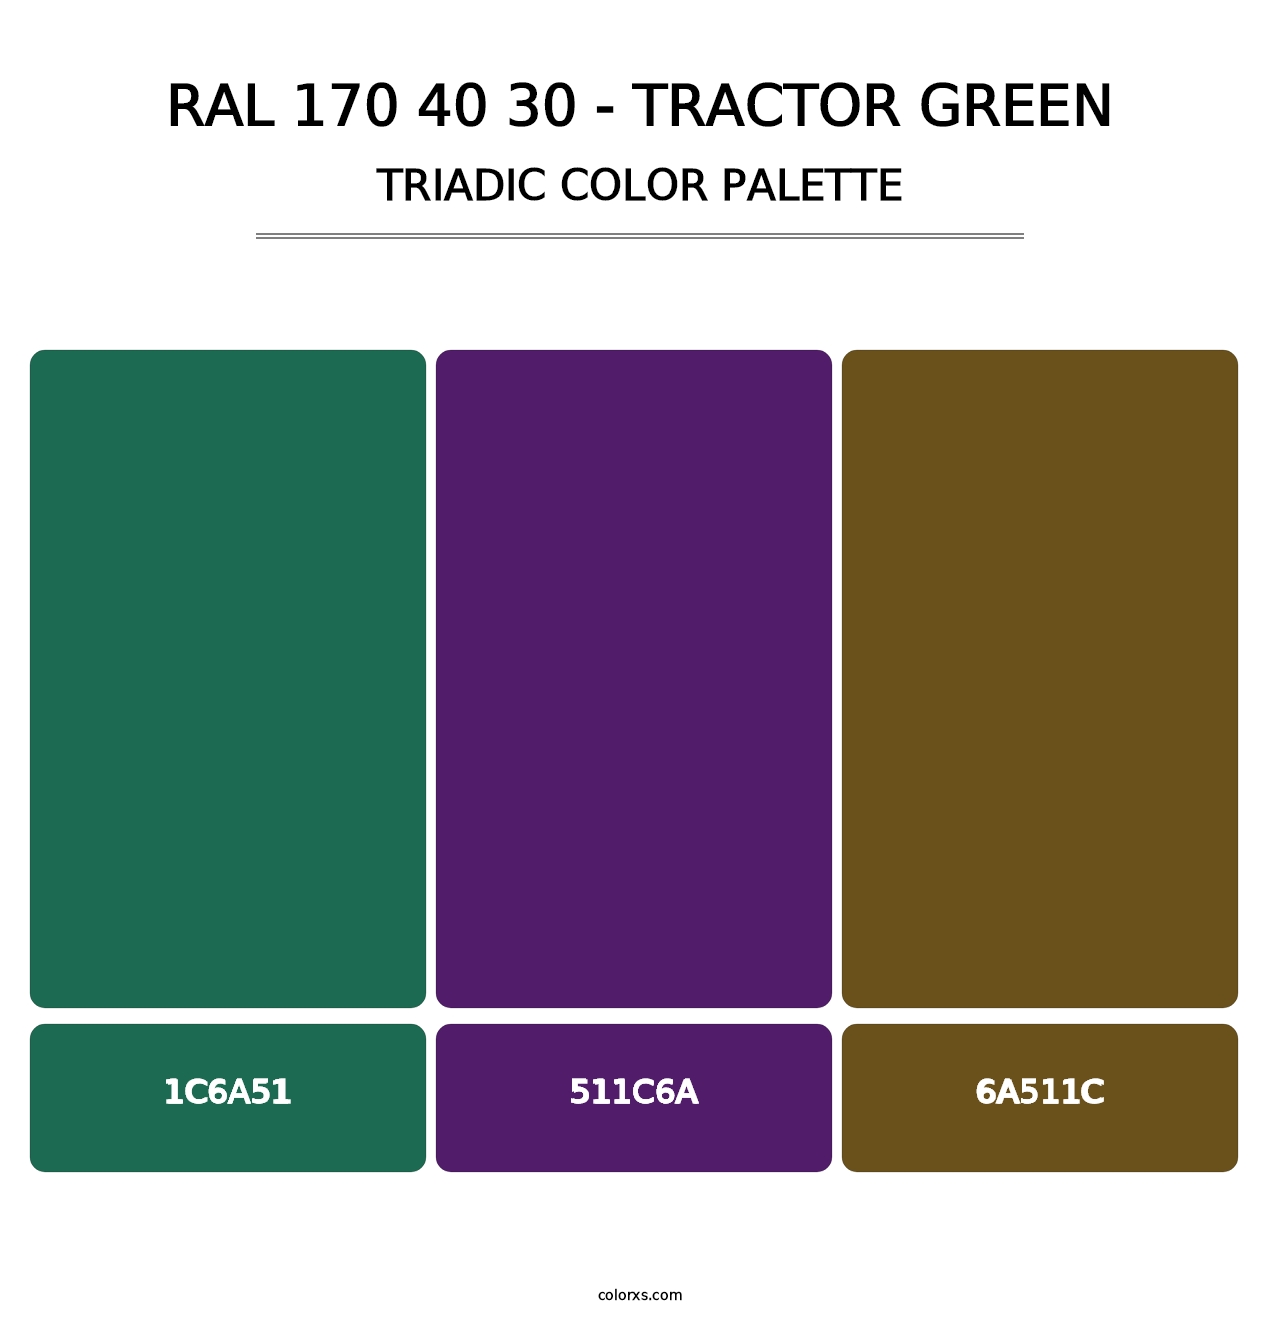 RAL 170 40 30 - Tractor Green - Triadic Color Palette